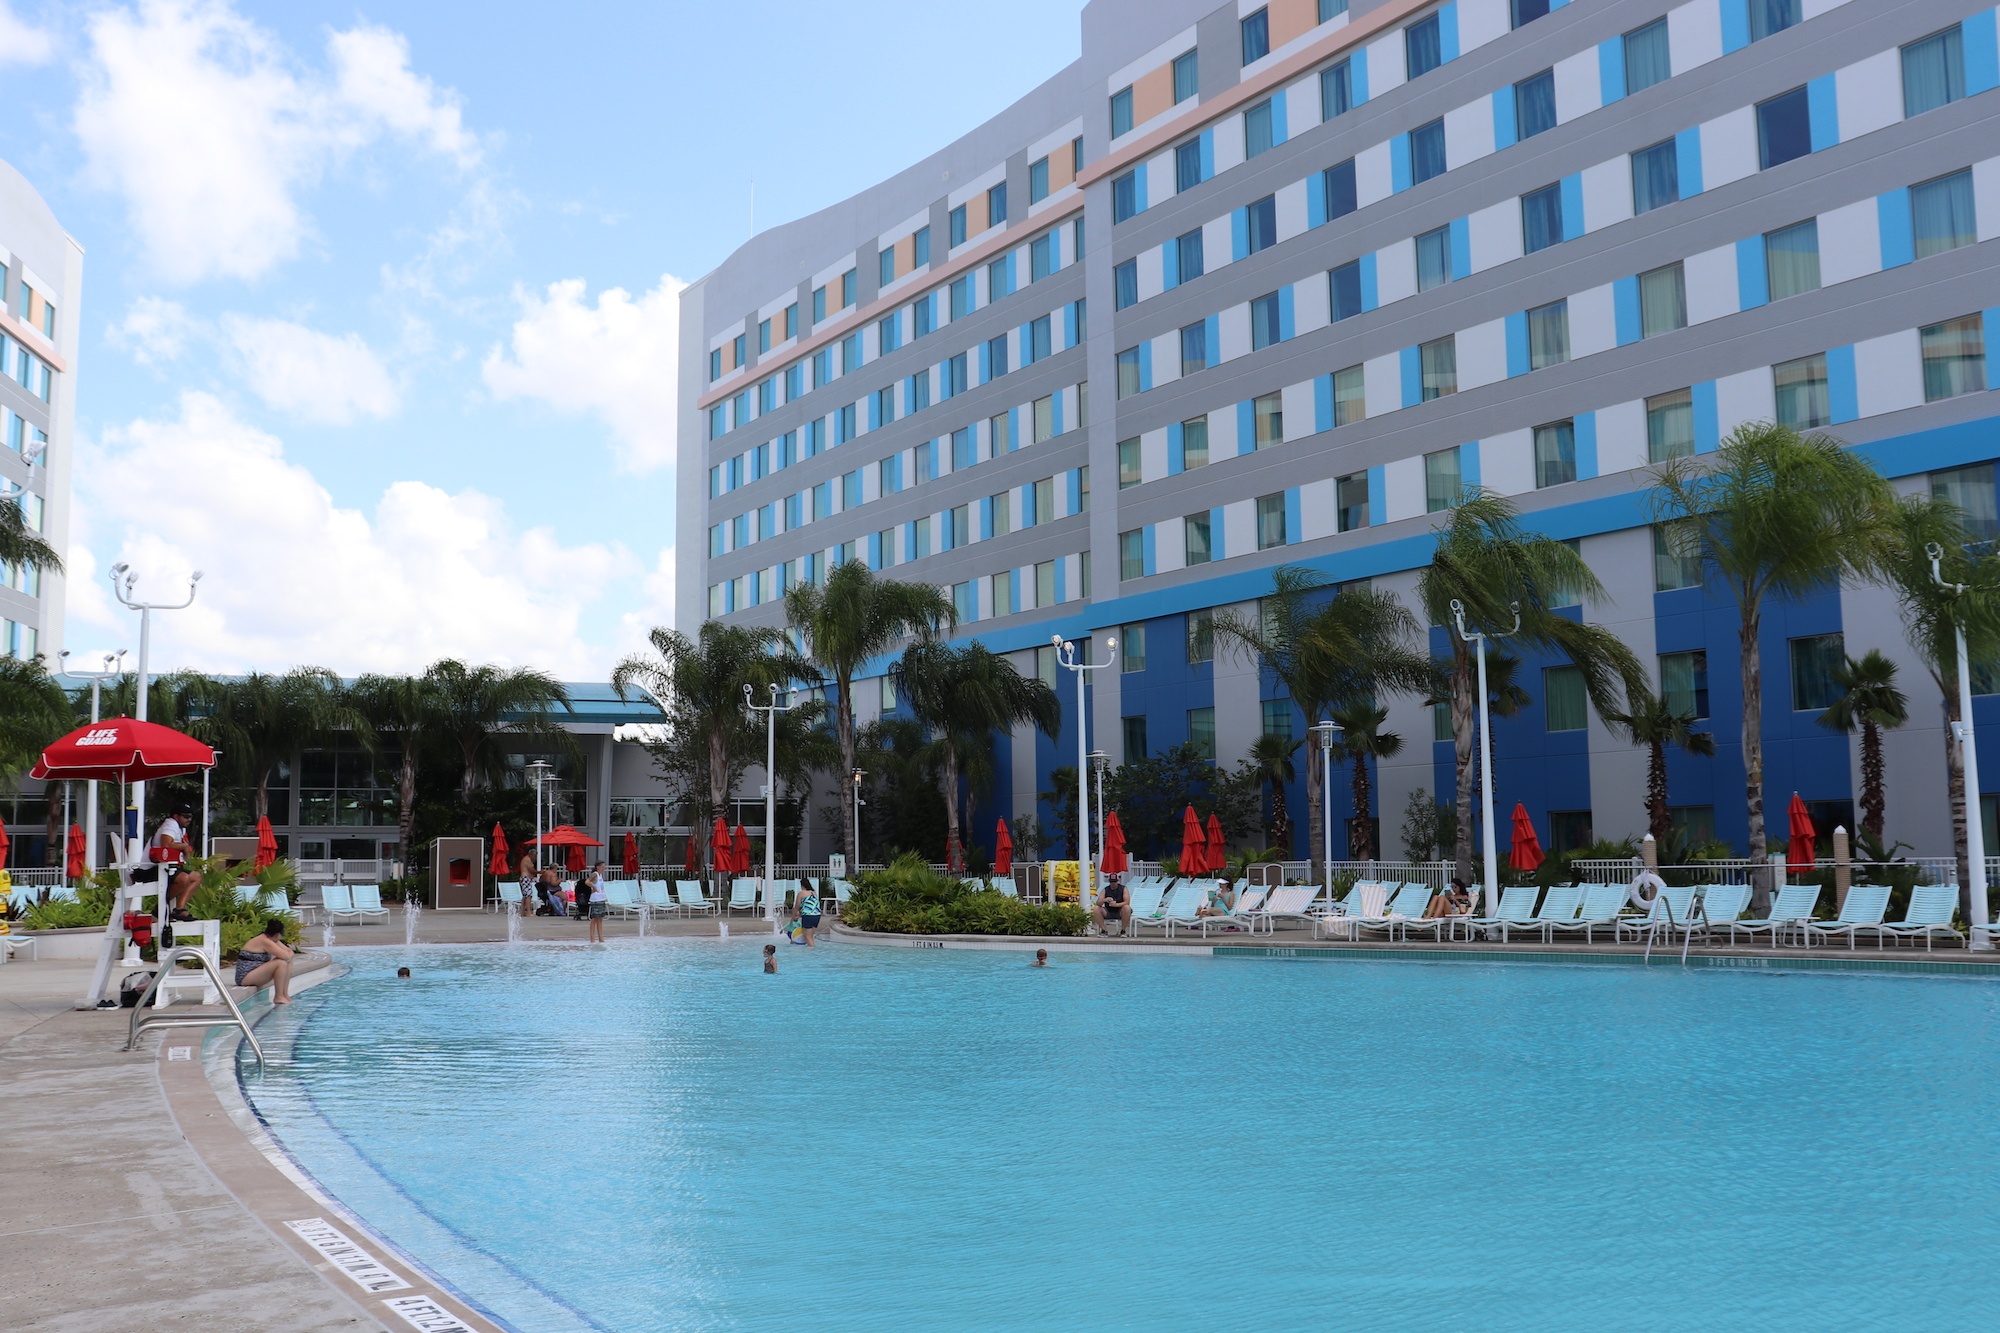 Main Pool at Universal's Endless Summer Resort - Surfside Inn and Suites